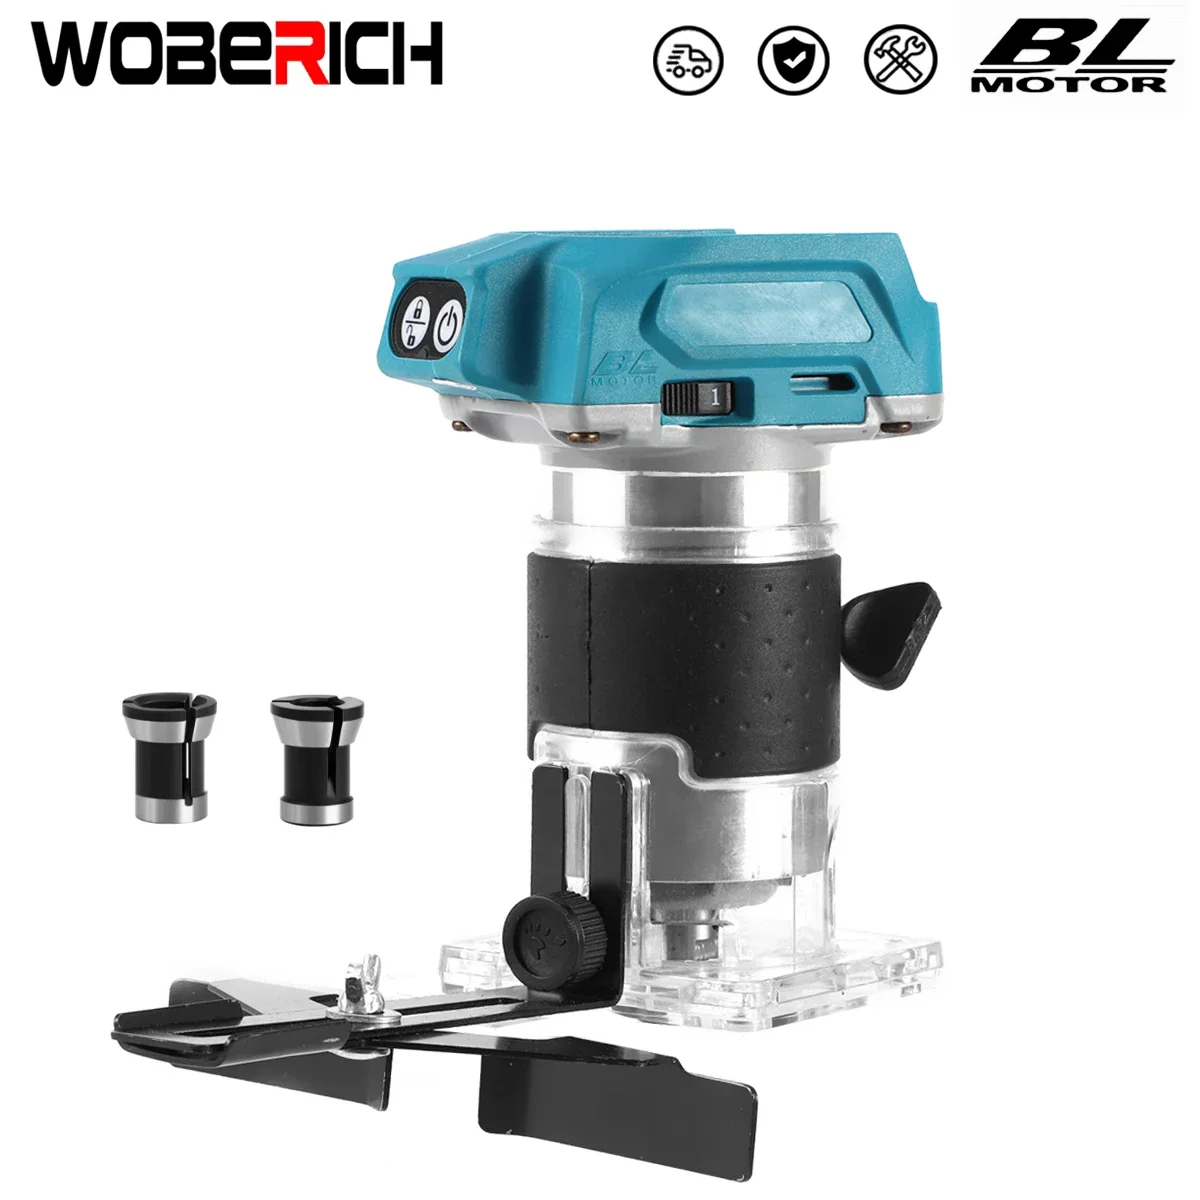 5 Speeds Brushless Electric Hand Trimmer Cordless Wood Router Woodworking Engraving Slotting Trimming Milling Machine For Makita 850w cordless wood electric planer electric router trimmer 15000rpm wood milling engraving slotting woodworking for 18v makita